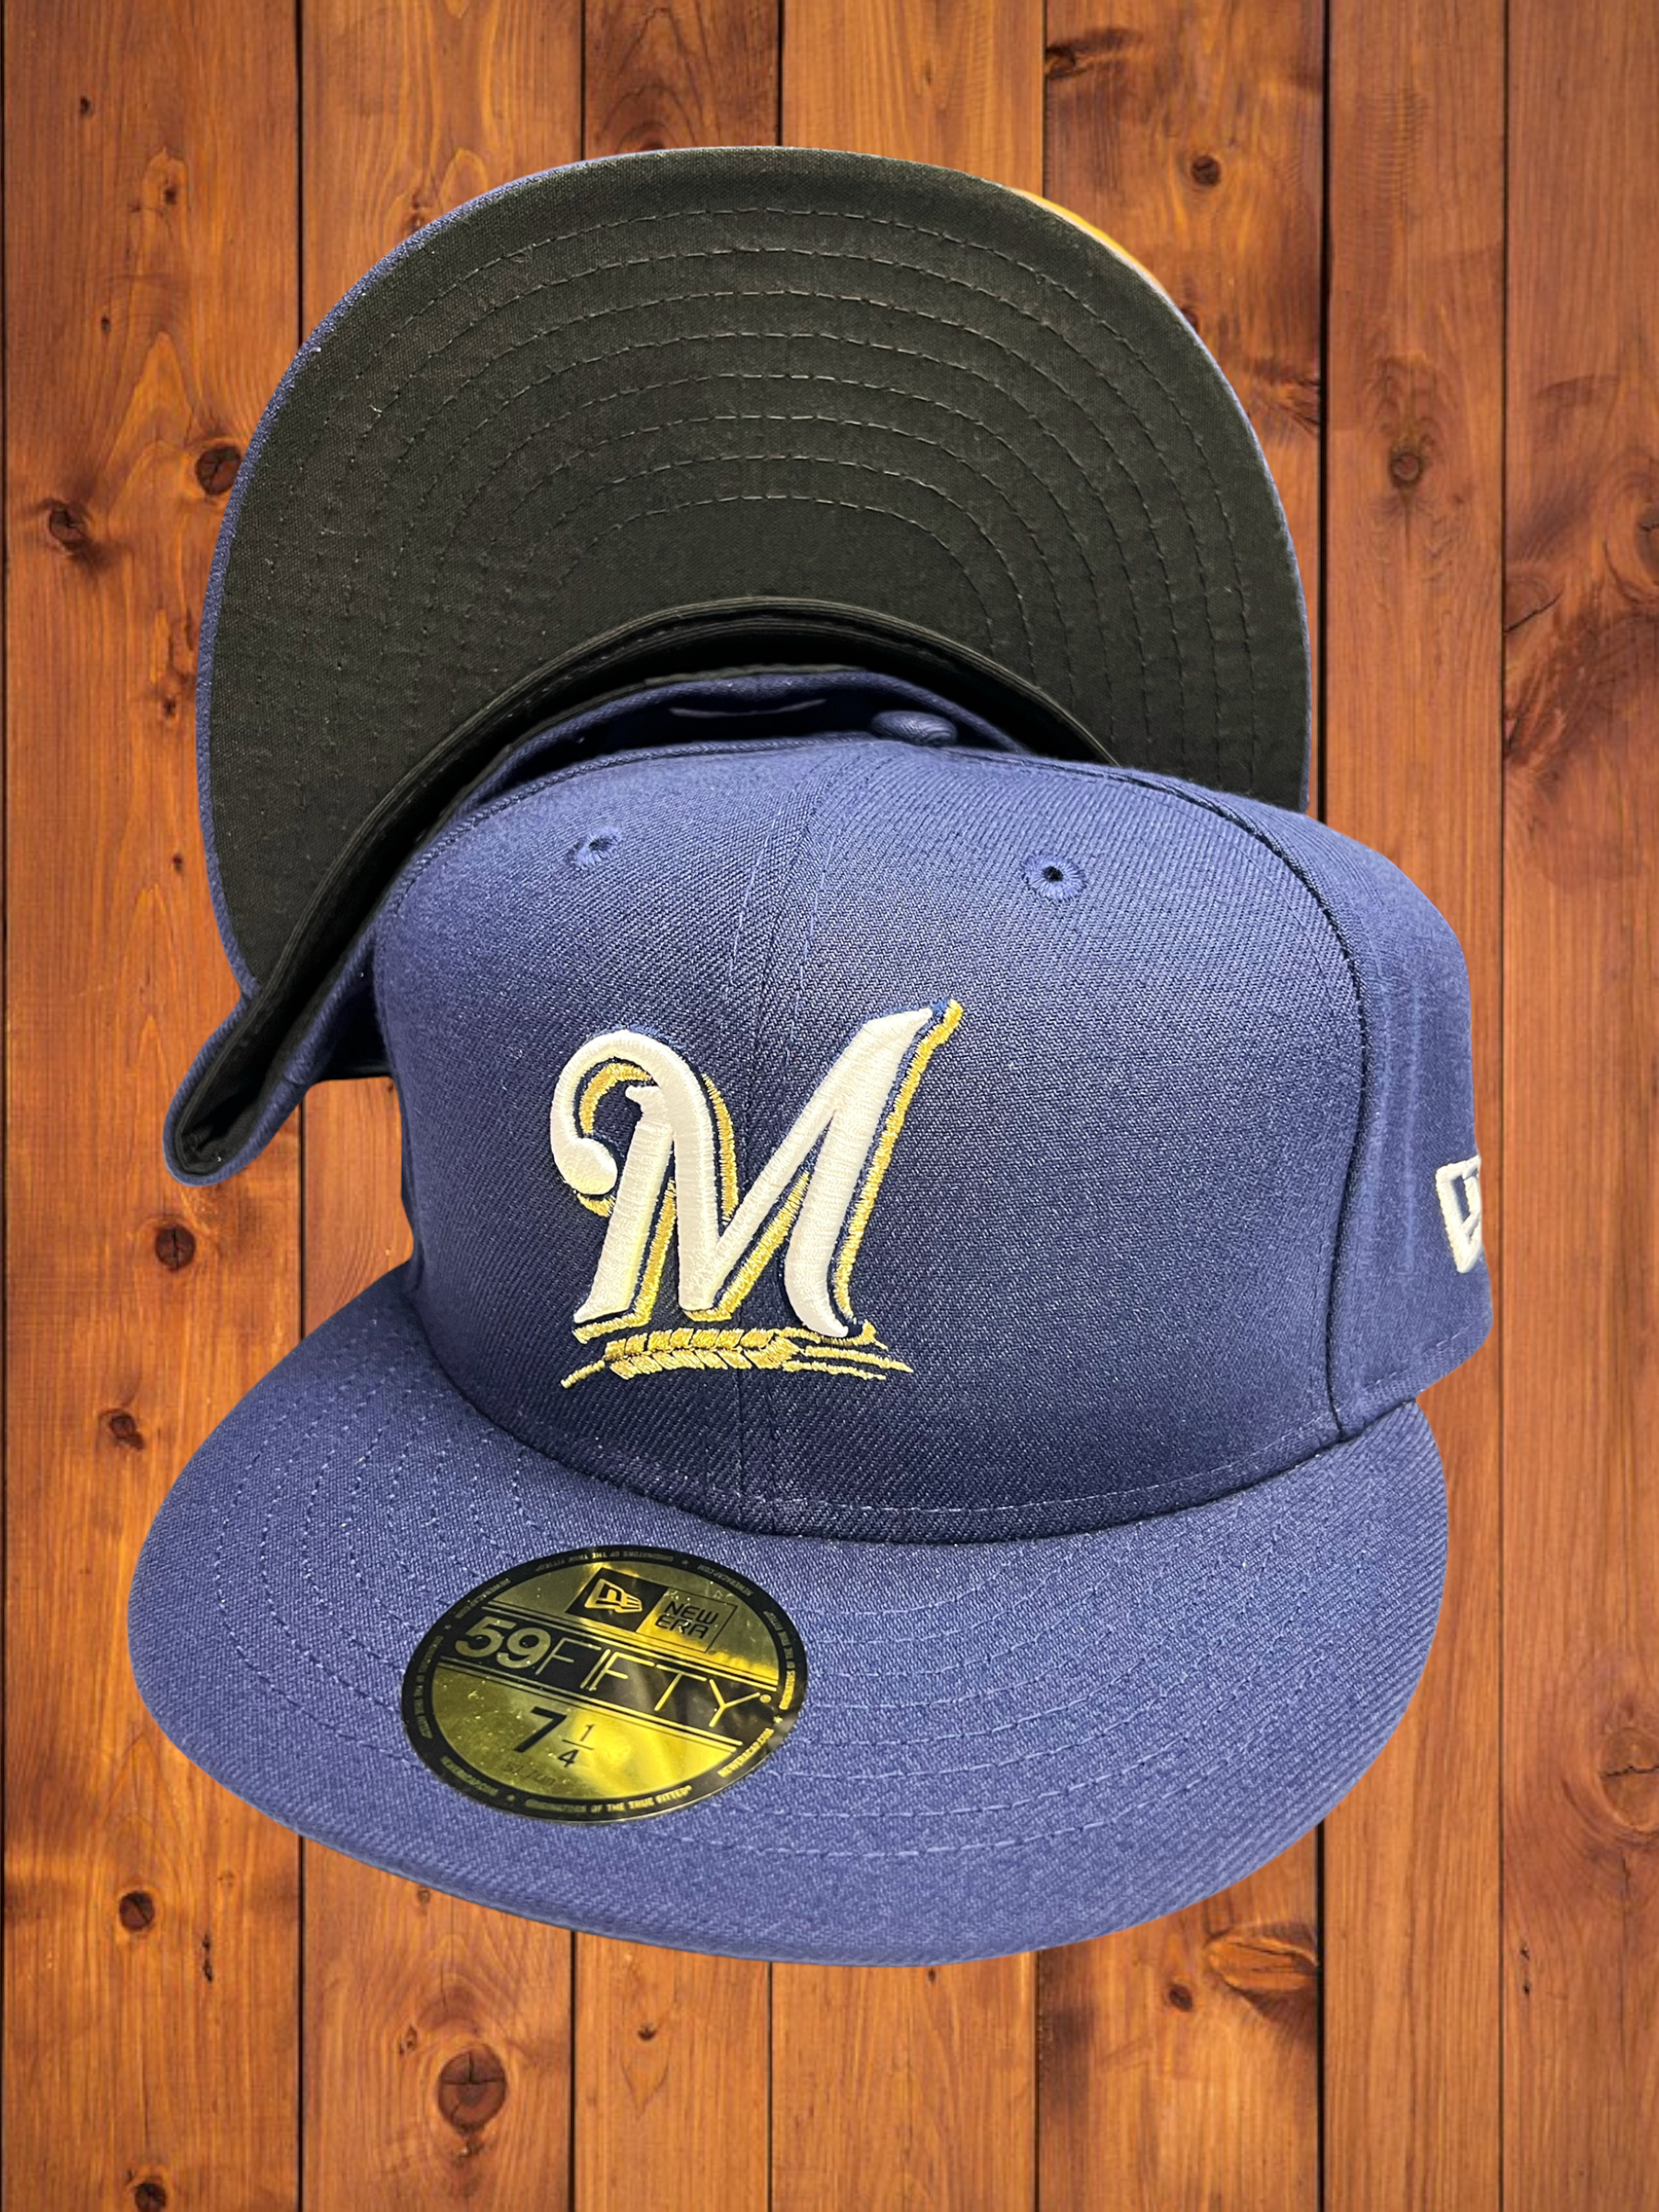 Milwaukee Brewers New Era Authentic On-Field 59FIFTY Fitted Cap